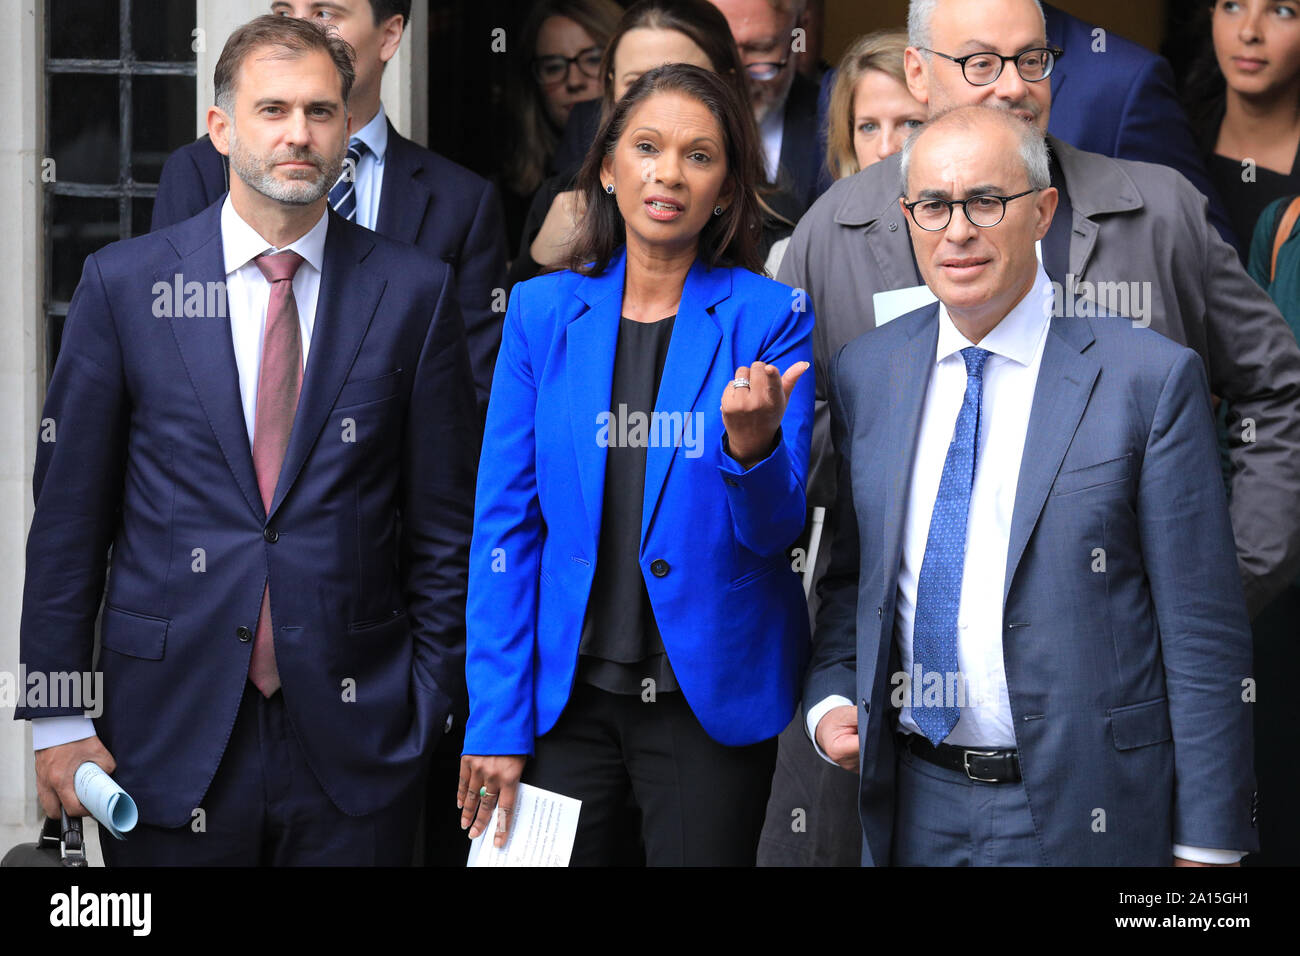 Westminster, London, UK. 24th Sep, 2019. Gina Miller speaks after winning the case, with Lord Pannick on her right side. The Supreme Court case ruling on the suspension of Parliament by the Prime Minister is announced at the court in Westminster this morning - the ruling outcome was against the government, judges found unanimously that that prorogation was illegal. Credit: Imageplotter/Alamy Live News Stock Photo